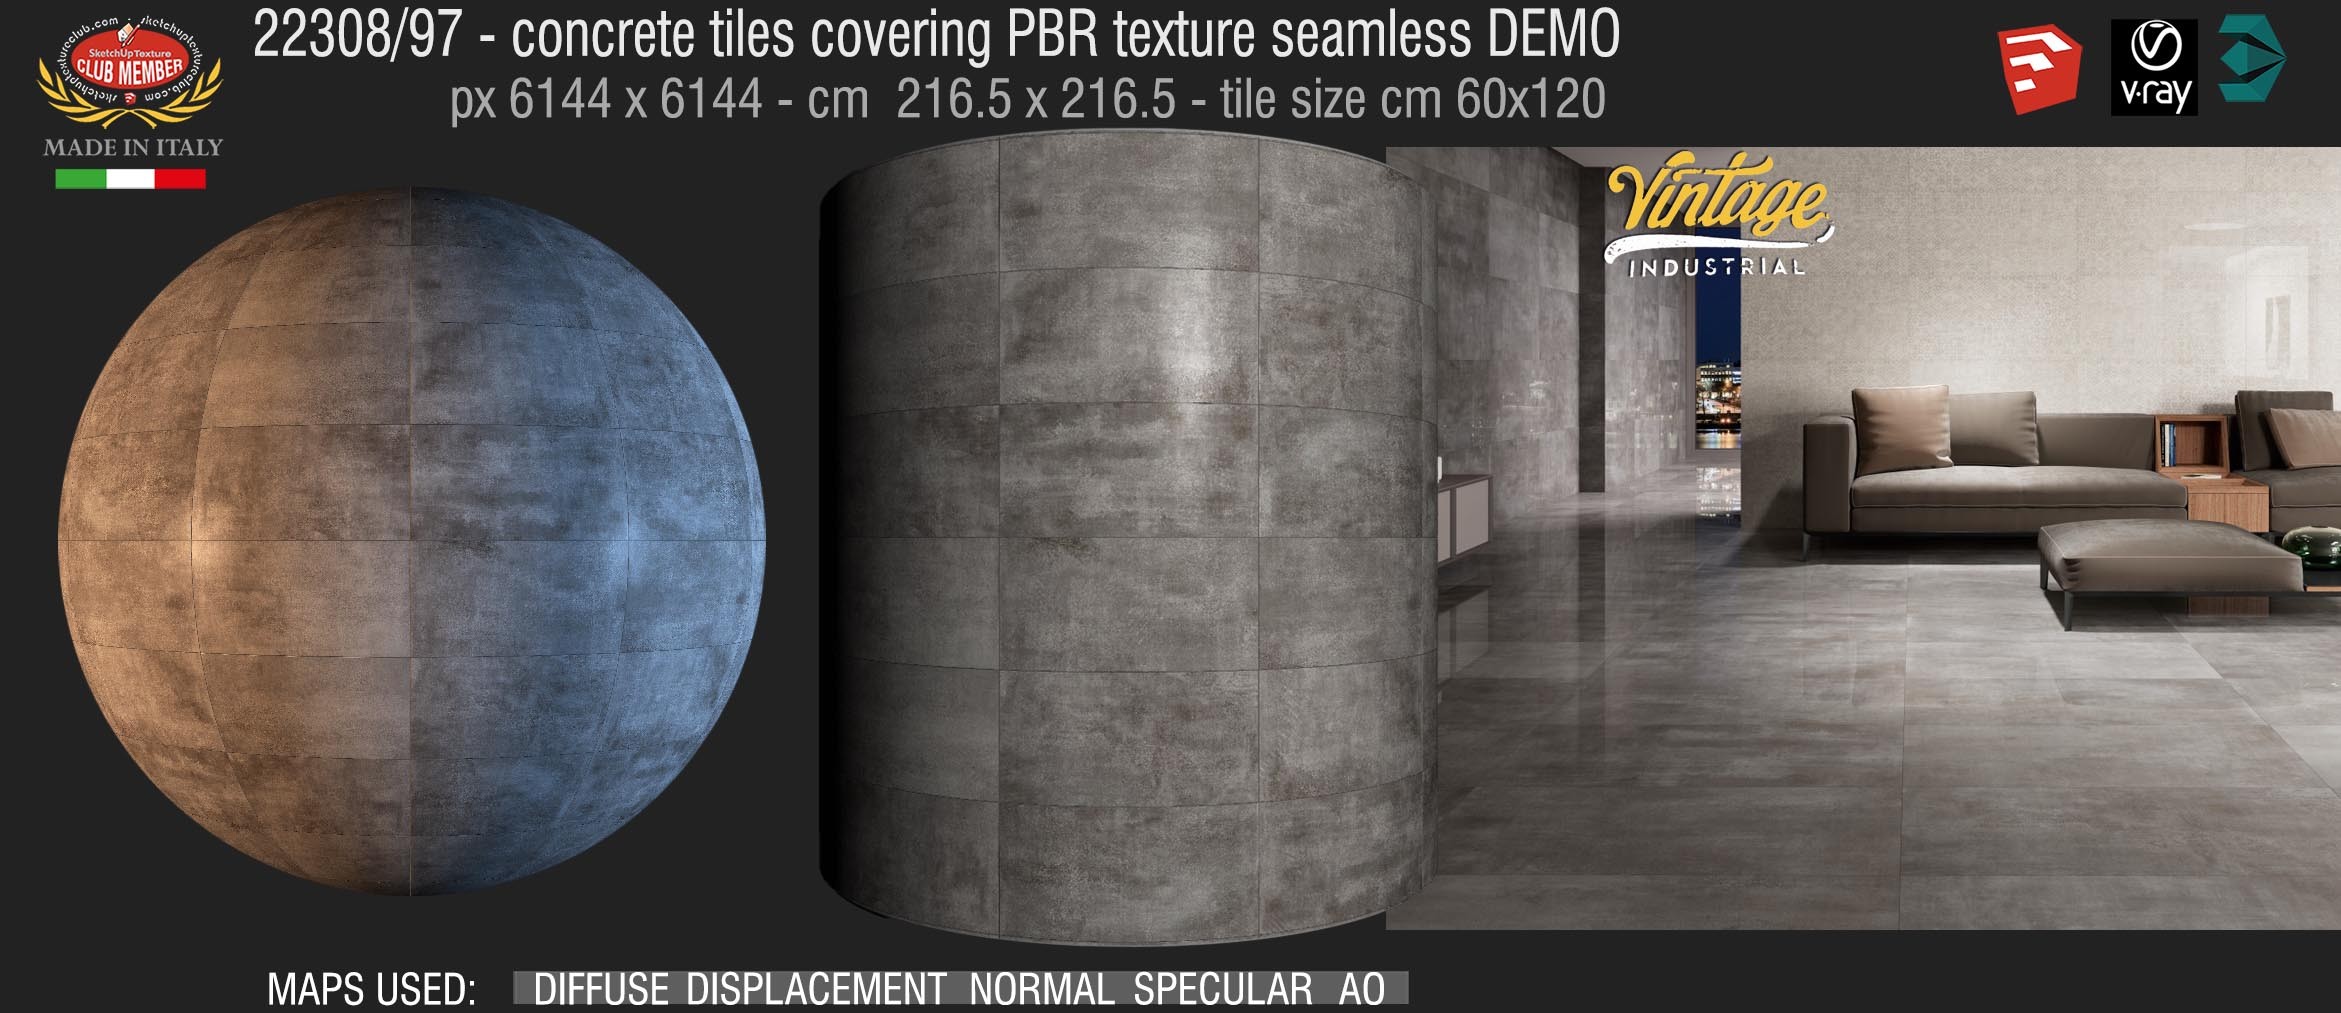 22308_97 concrete tiles covering PBR texture seamless DEMO